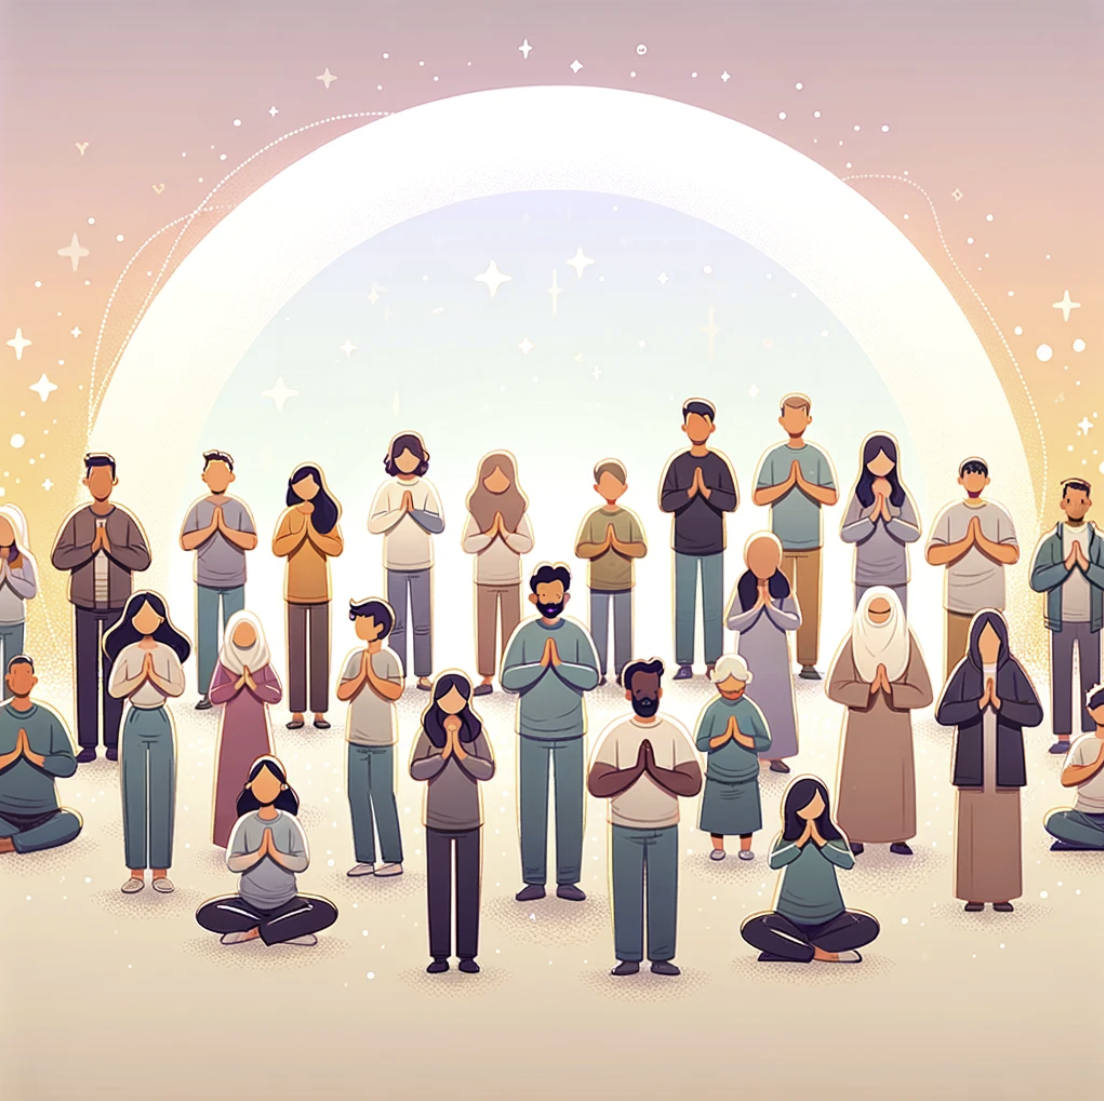 image of a diverse group of people in various postures of prayer, surrounded by a warm and serene setting